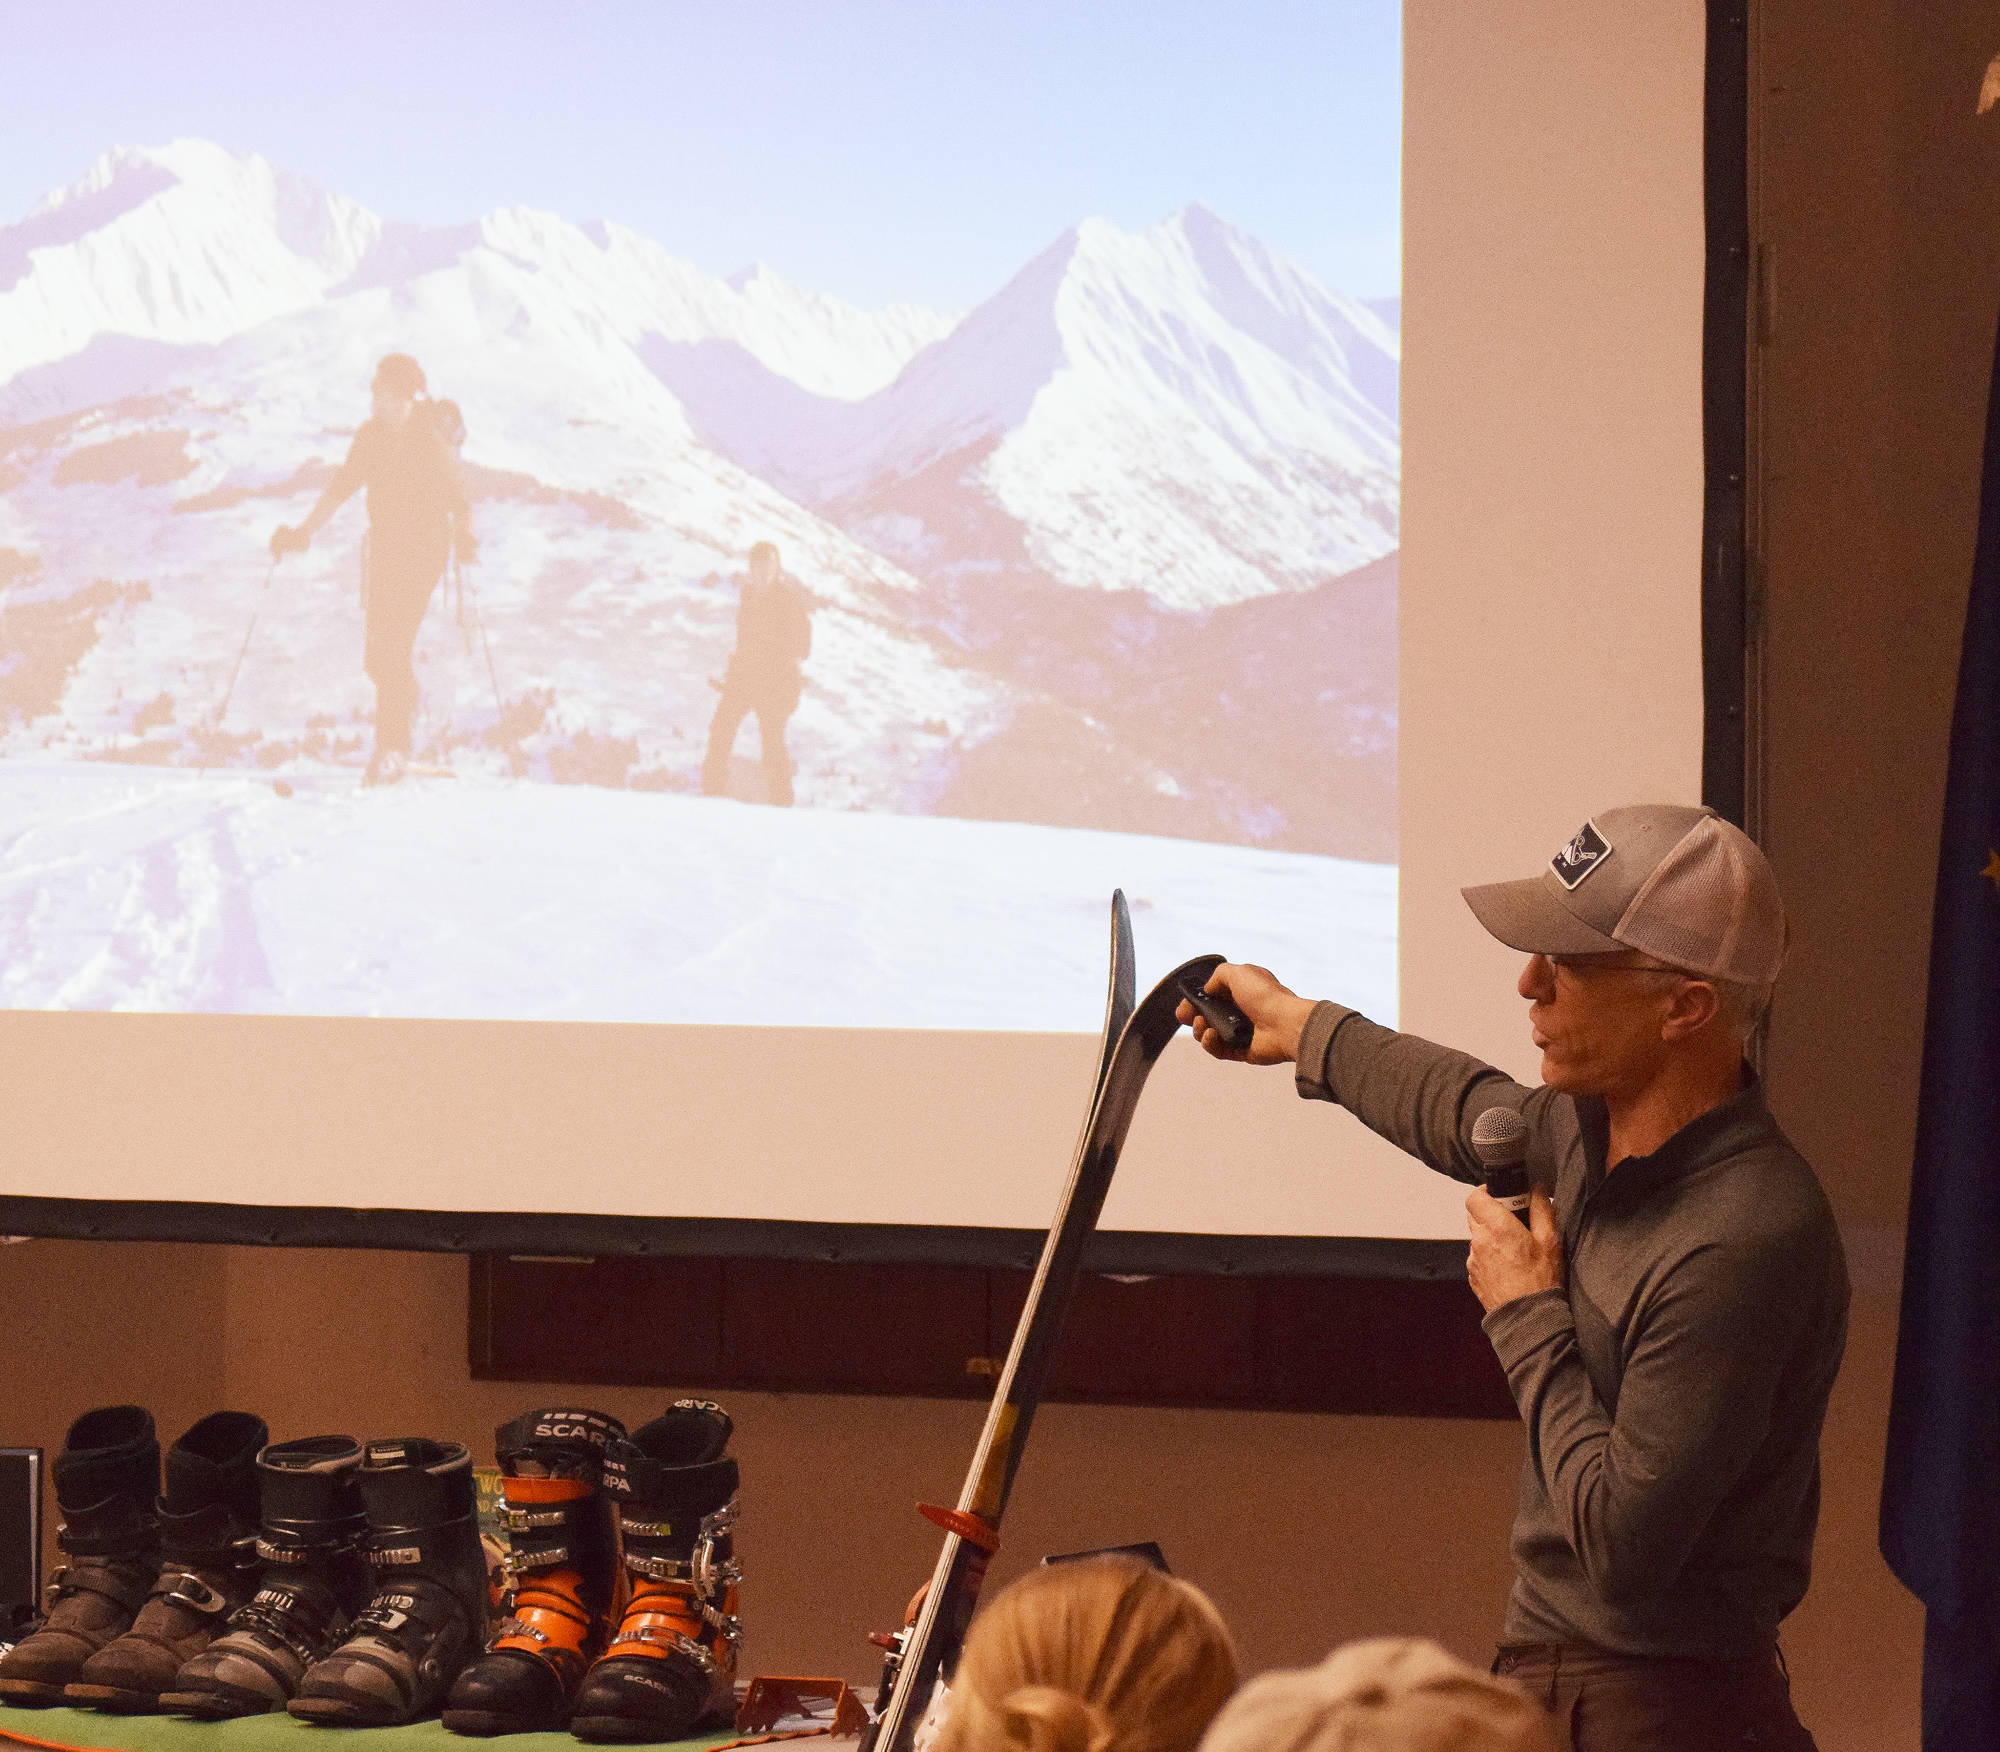 Tony Doyle points out the finer details in a photo presentation Dec. 20 at the Kenai Visitors and Cultural Center. (Photo by Joey Klecka/Peninsula Clarion)